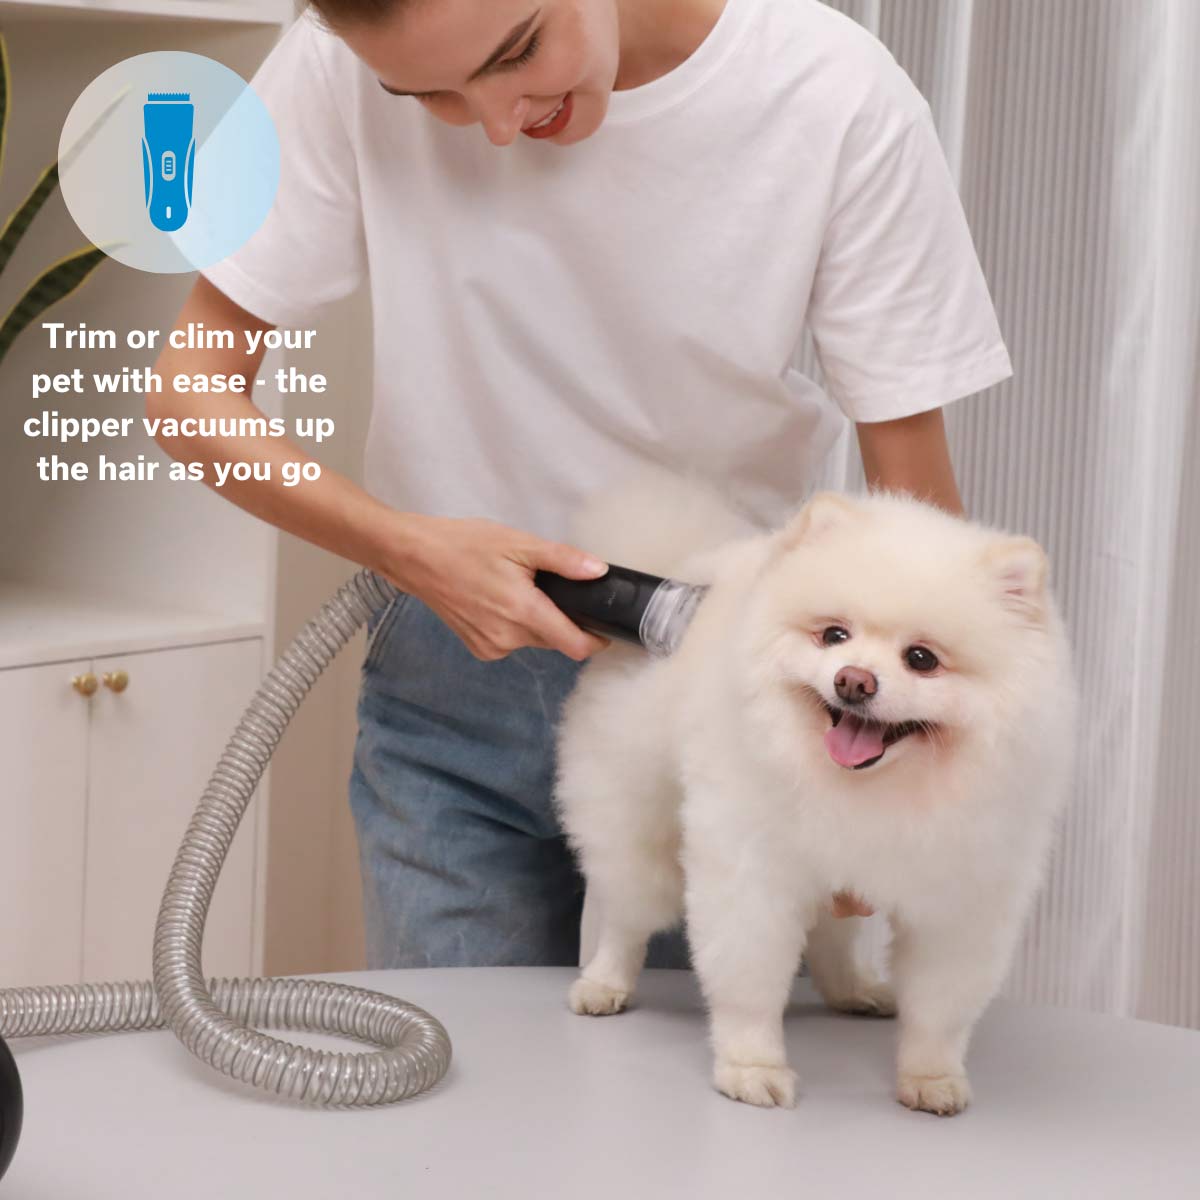 furMe Professional Pet Grooming Vacuum System Grooming Kit comes with all the tools you need to groom your pet at home: grooming brush, de-shedding Brush for undercoat grooming on dogs and cats, AirClipper electric clippers for Dog and Cat hair trimming and clipping, a crevice nozzle head, and a cleaning brush. All of the pet hair you trim or brush gets vacuumed up. 